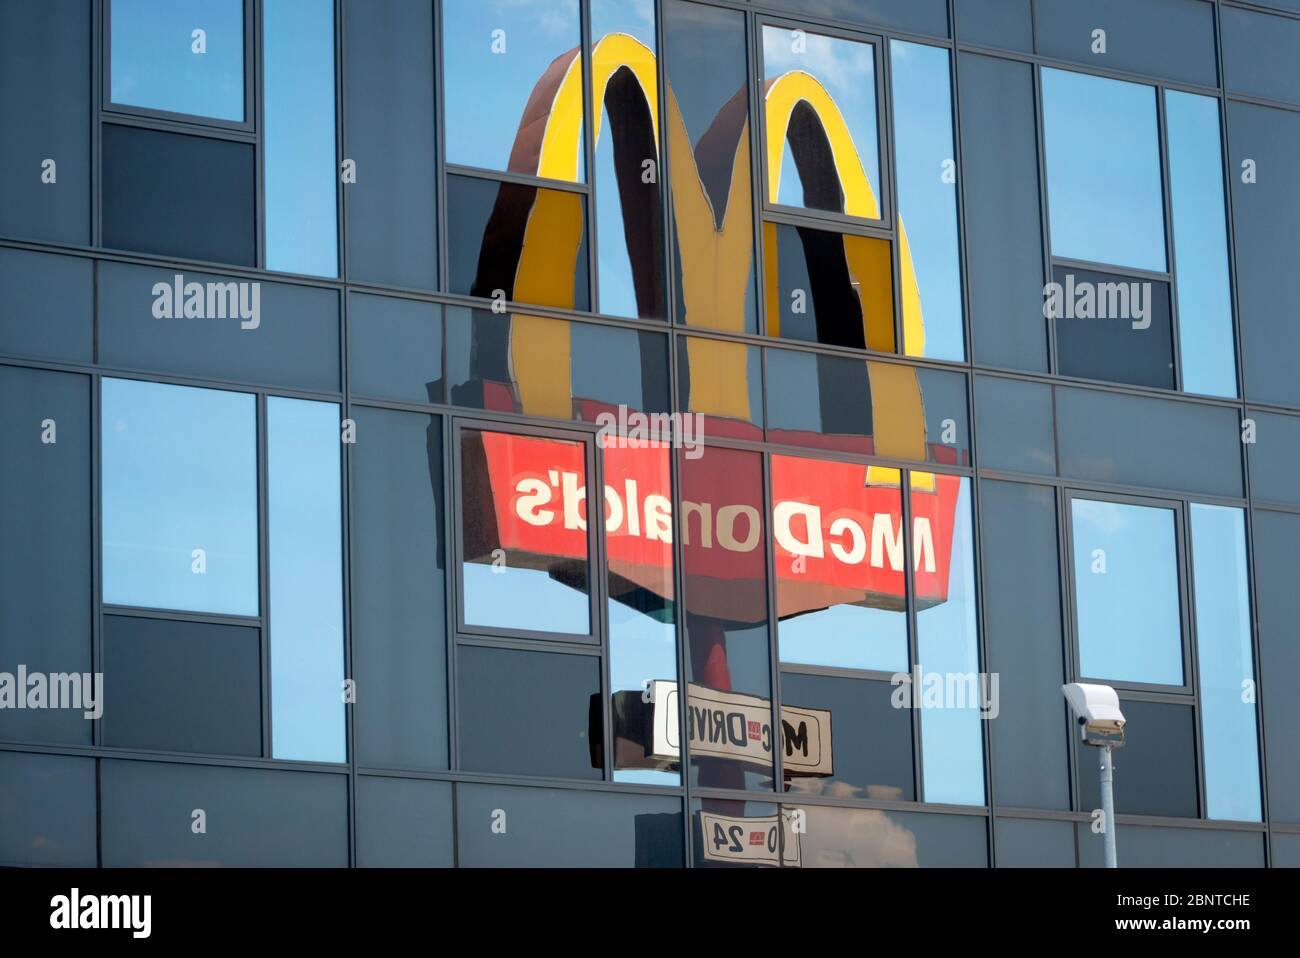 McDonald's logo and sign reflections in glass building Stock Photo